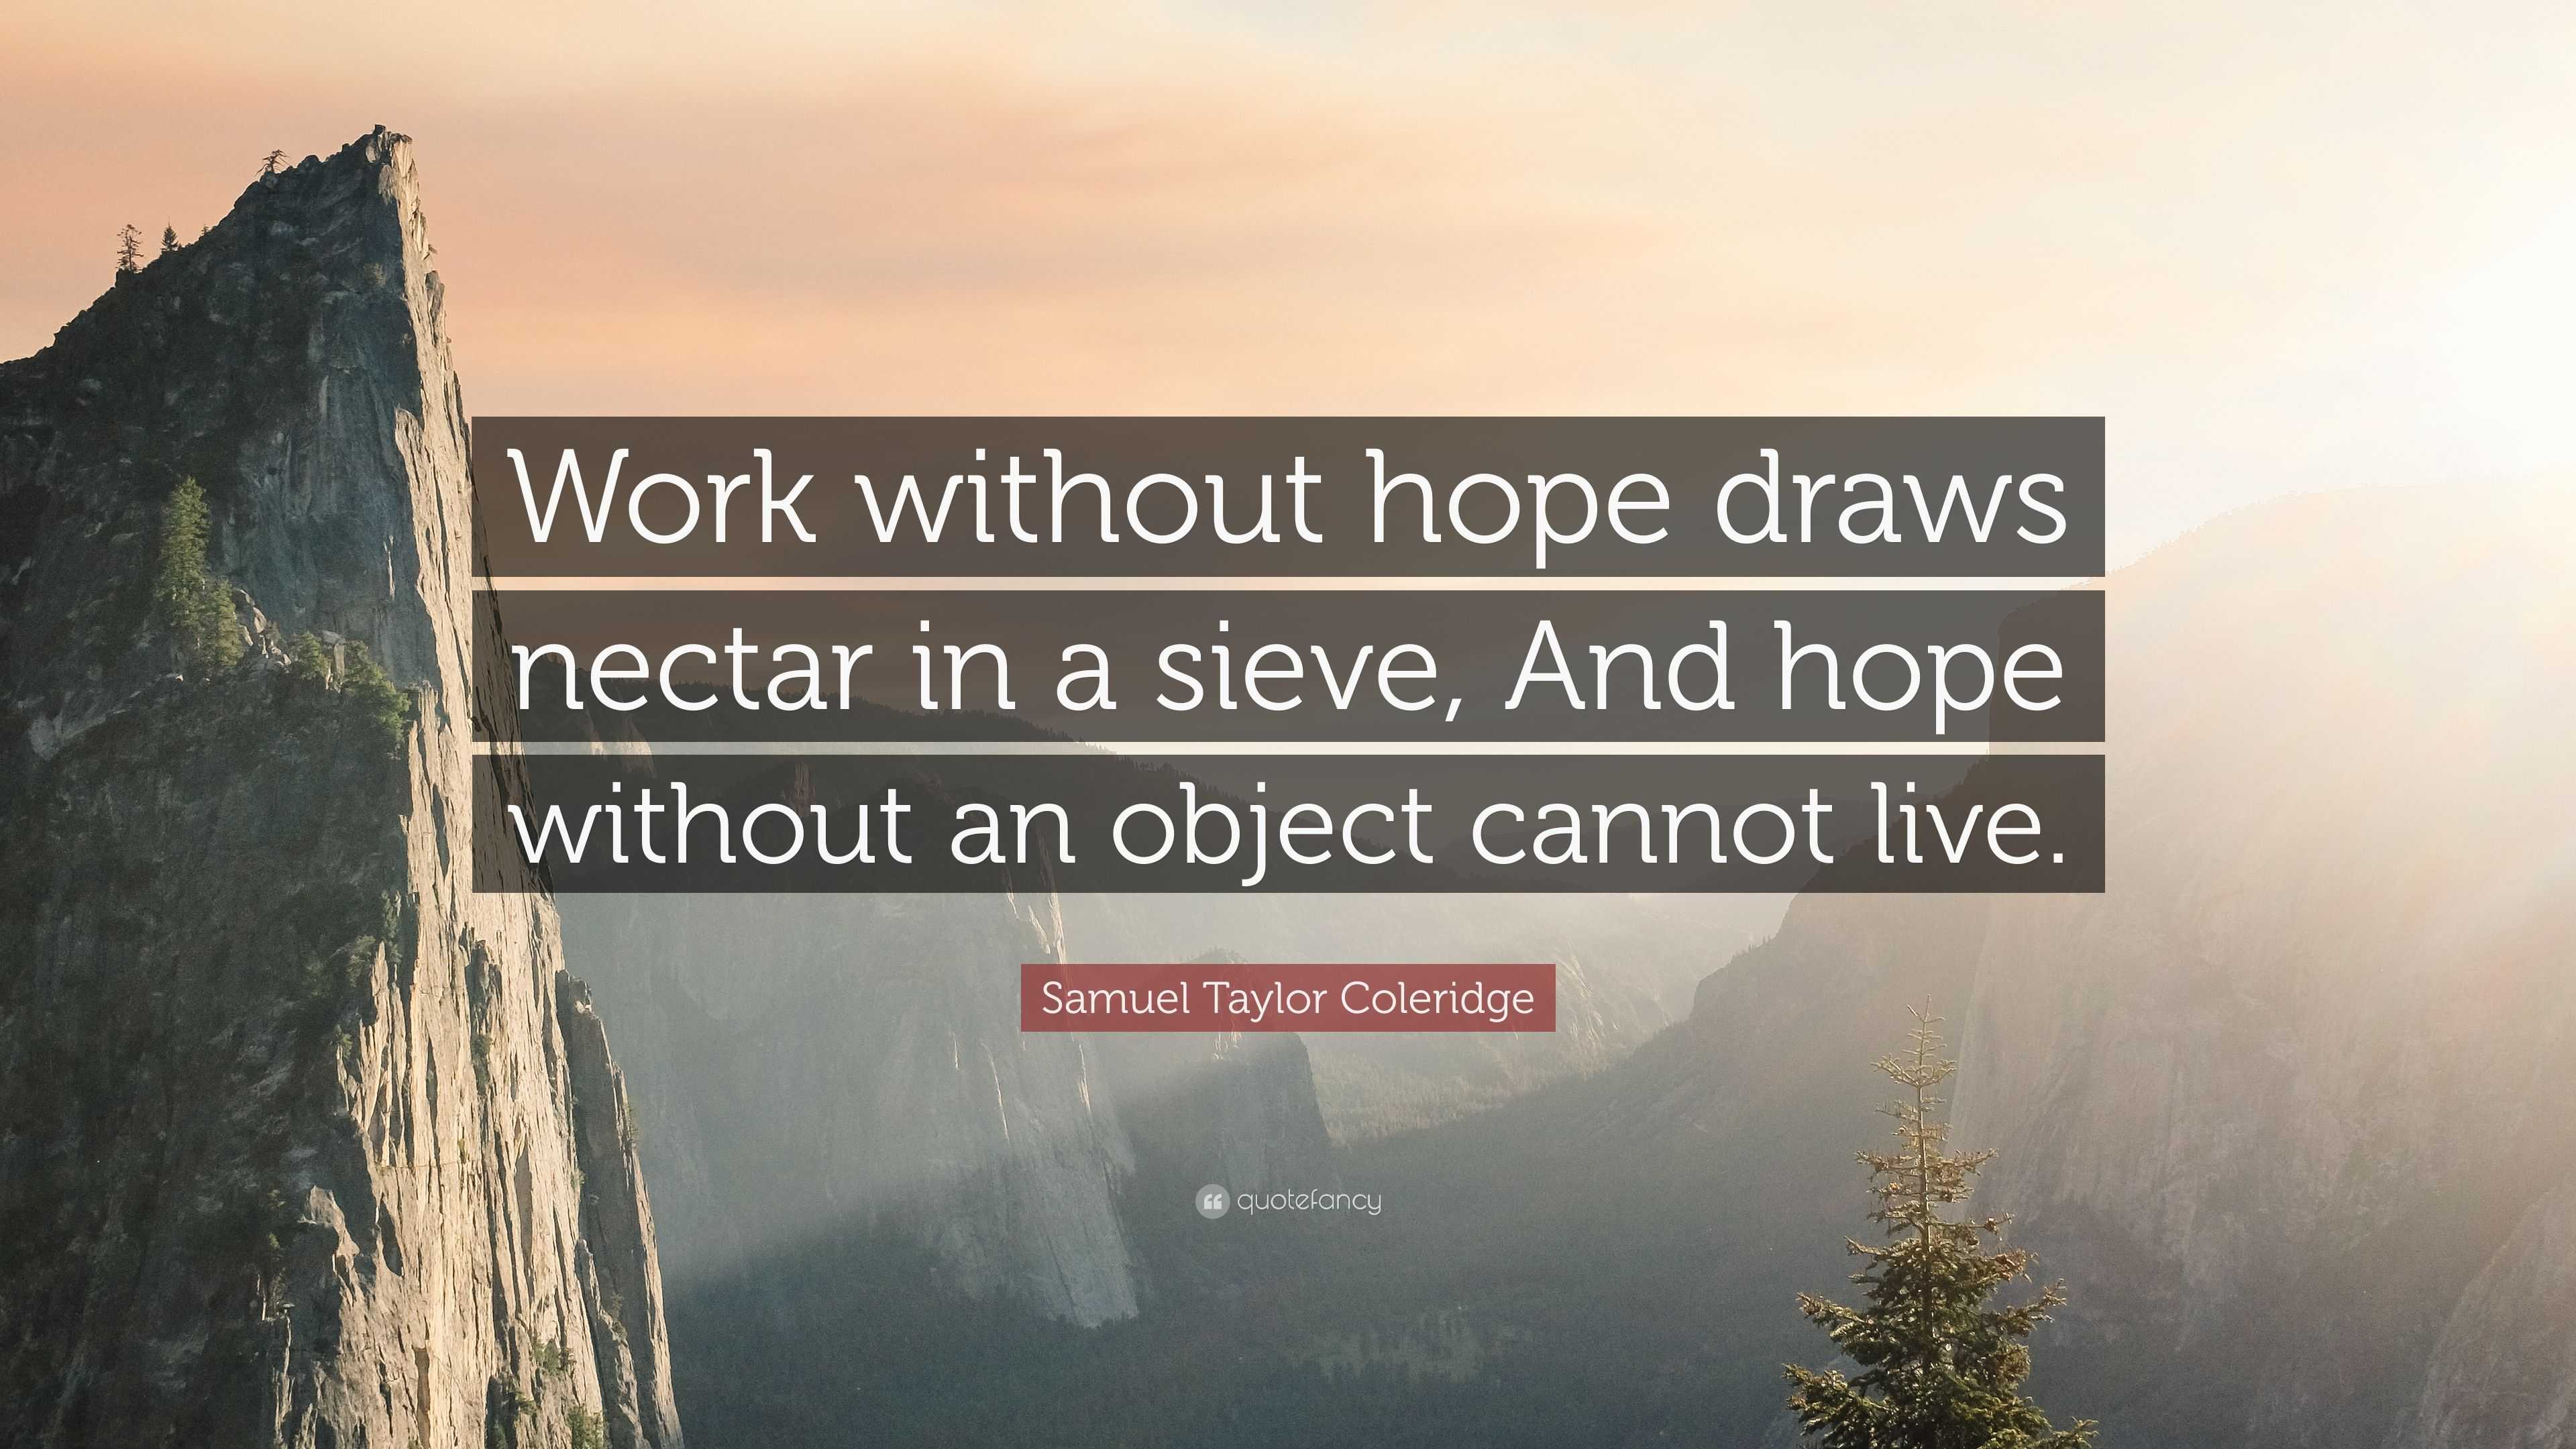 Samuel Taylor Coleridge Quote: “Work without hope draws nectar in a sieve, And hope ...